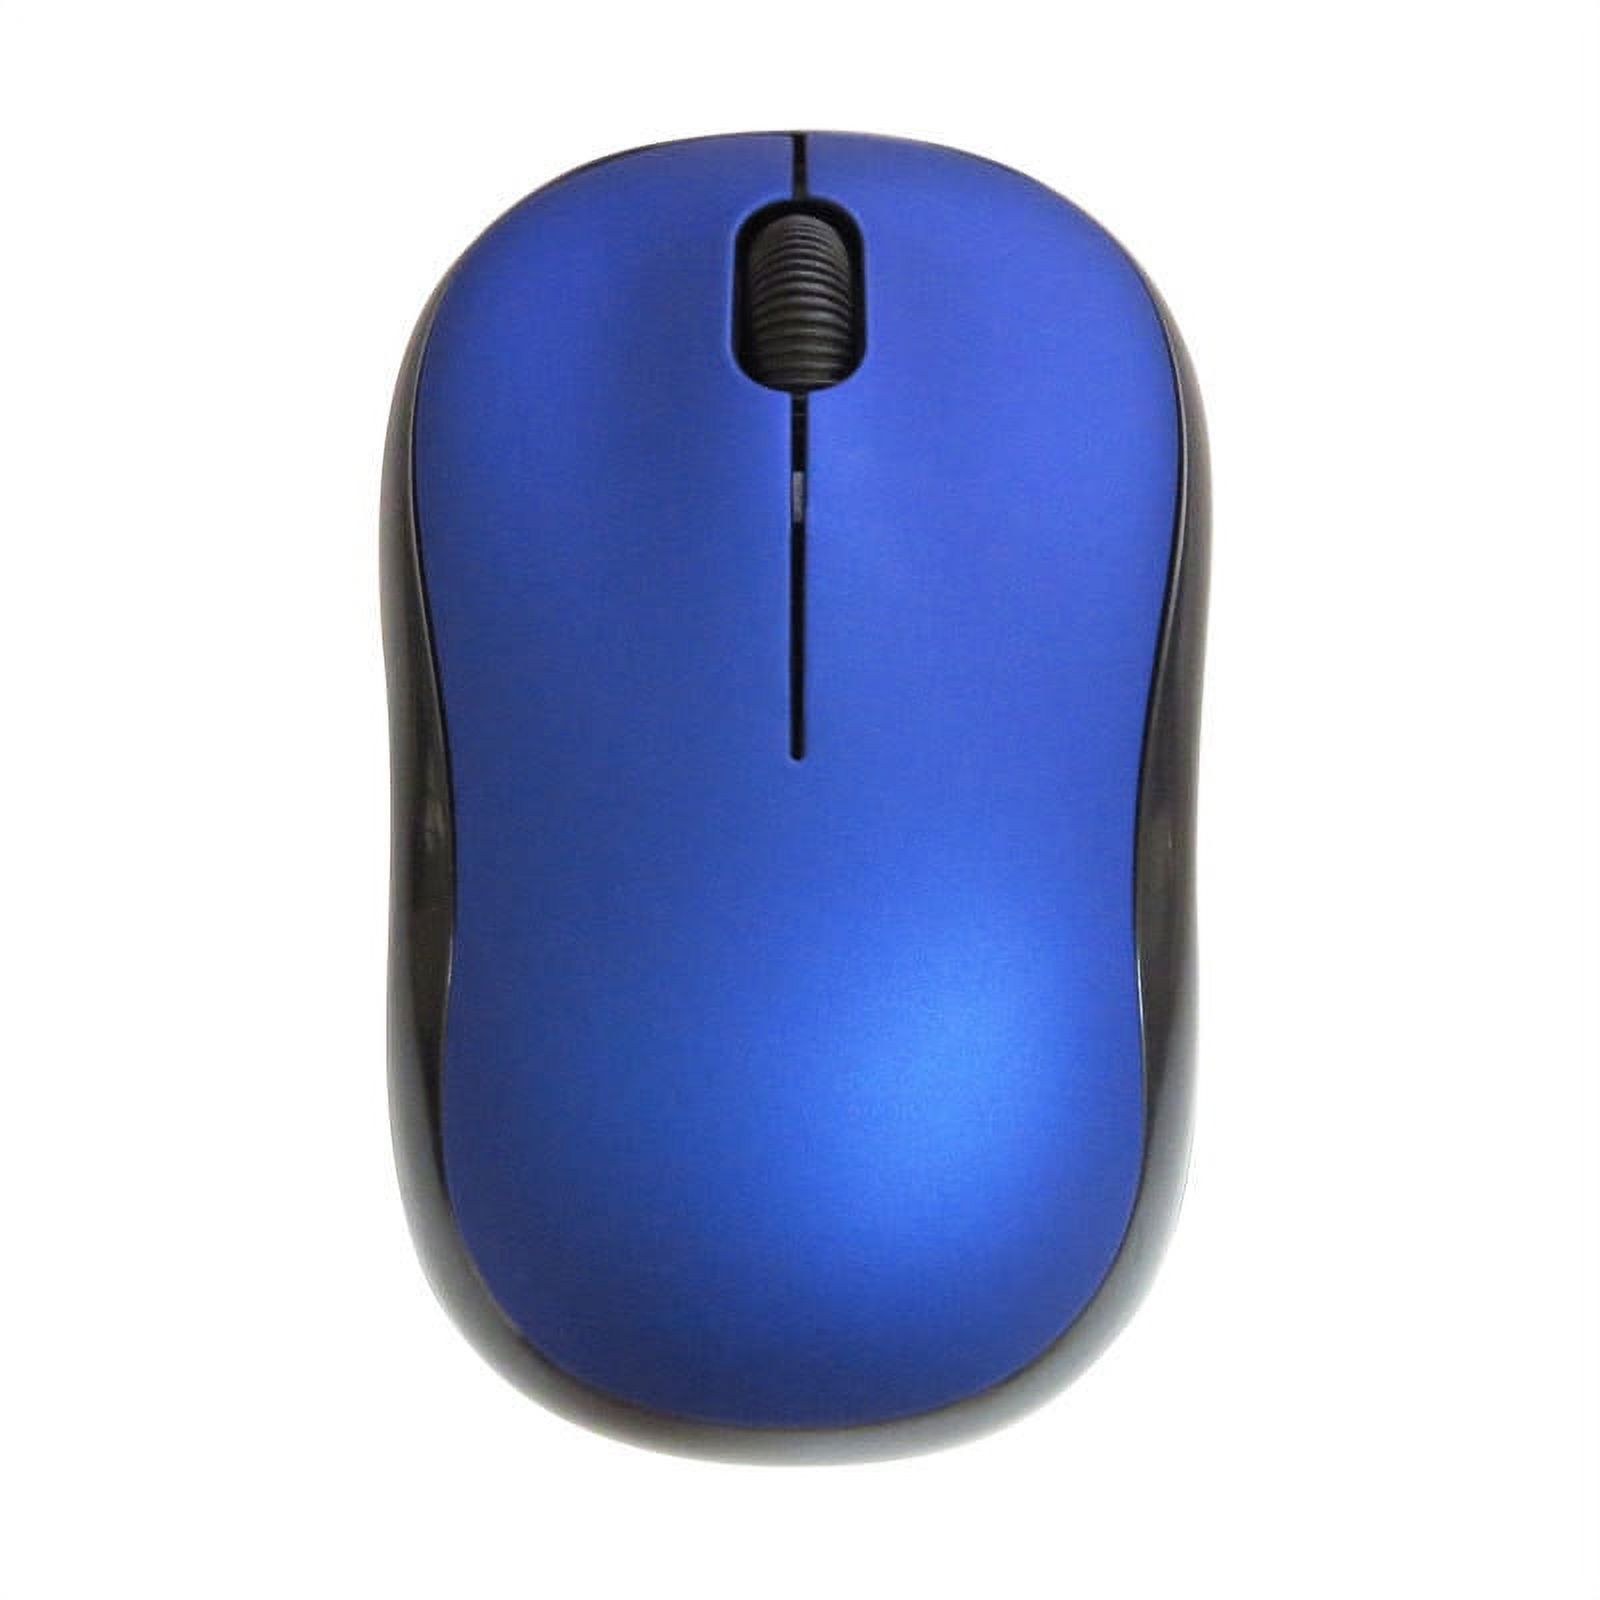 Logitech Compact Wireless Mouse, 2.4 GHz with USB Unifying Receiver, Optical Tracking, Blue - image 2 of 6